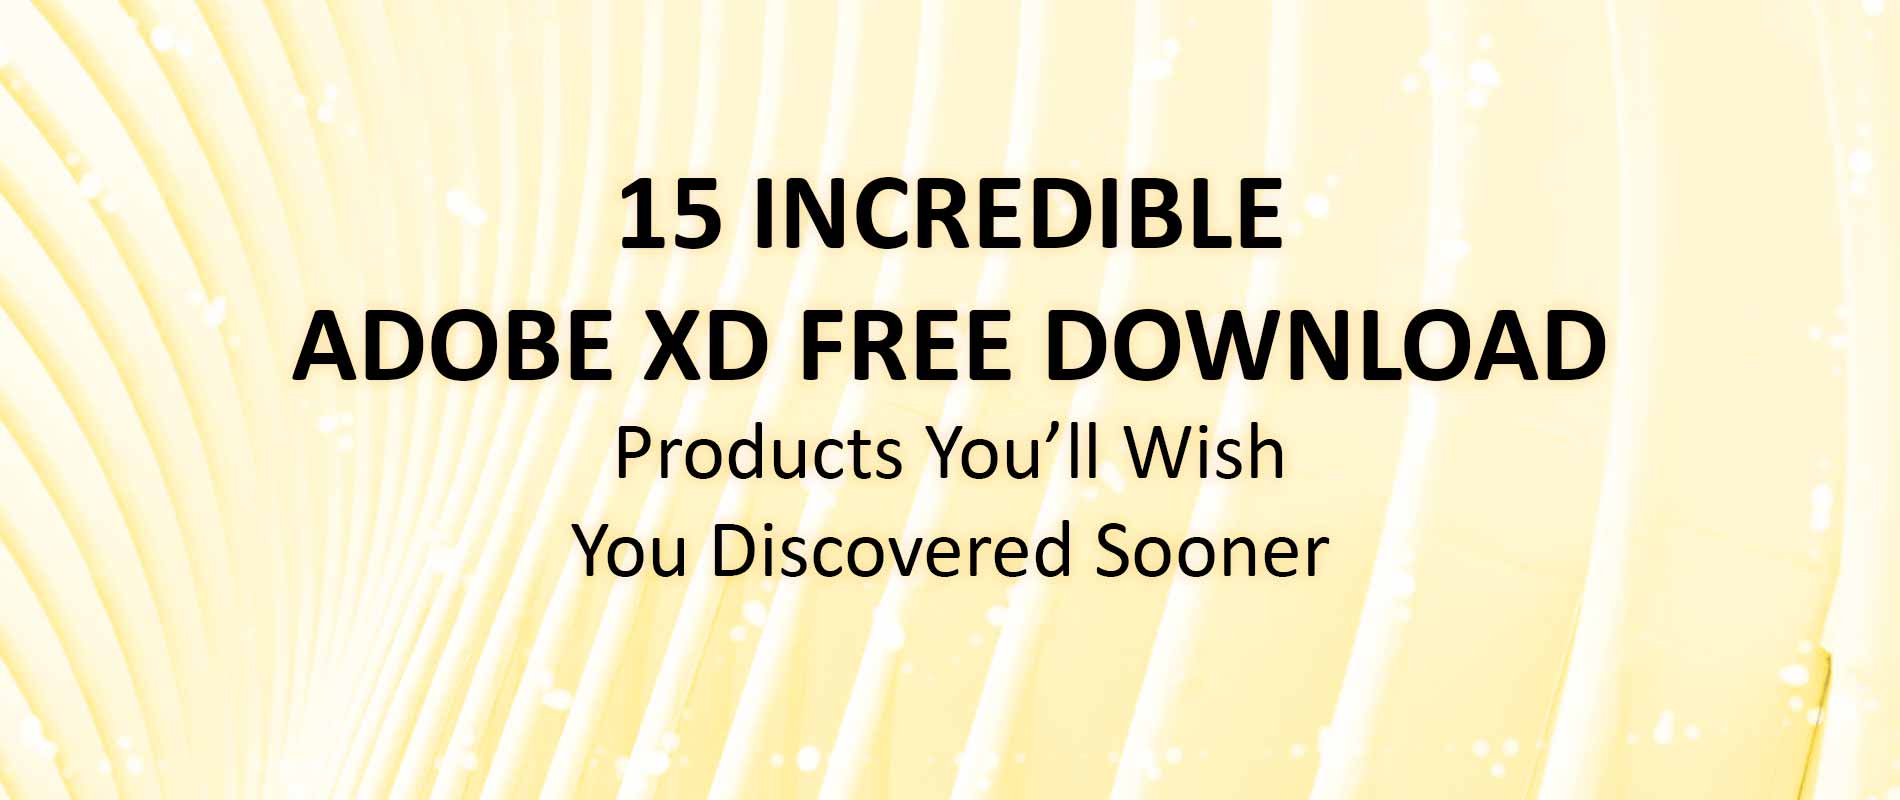 You are currently viewing 15 Incredible Adobe Xd Free Download Products You’ll Wish You Discovered Sooner